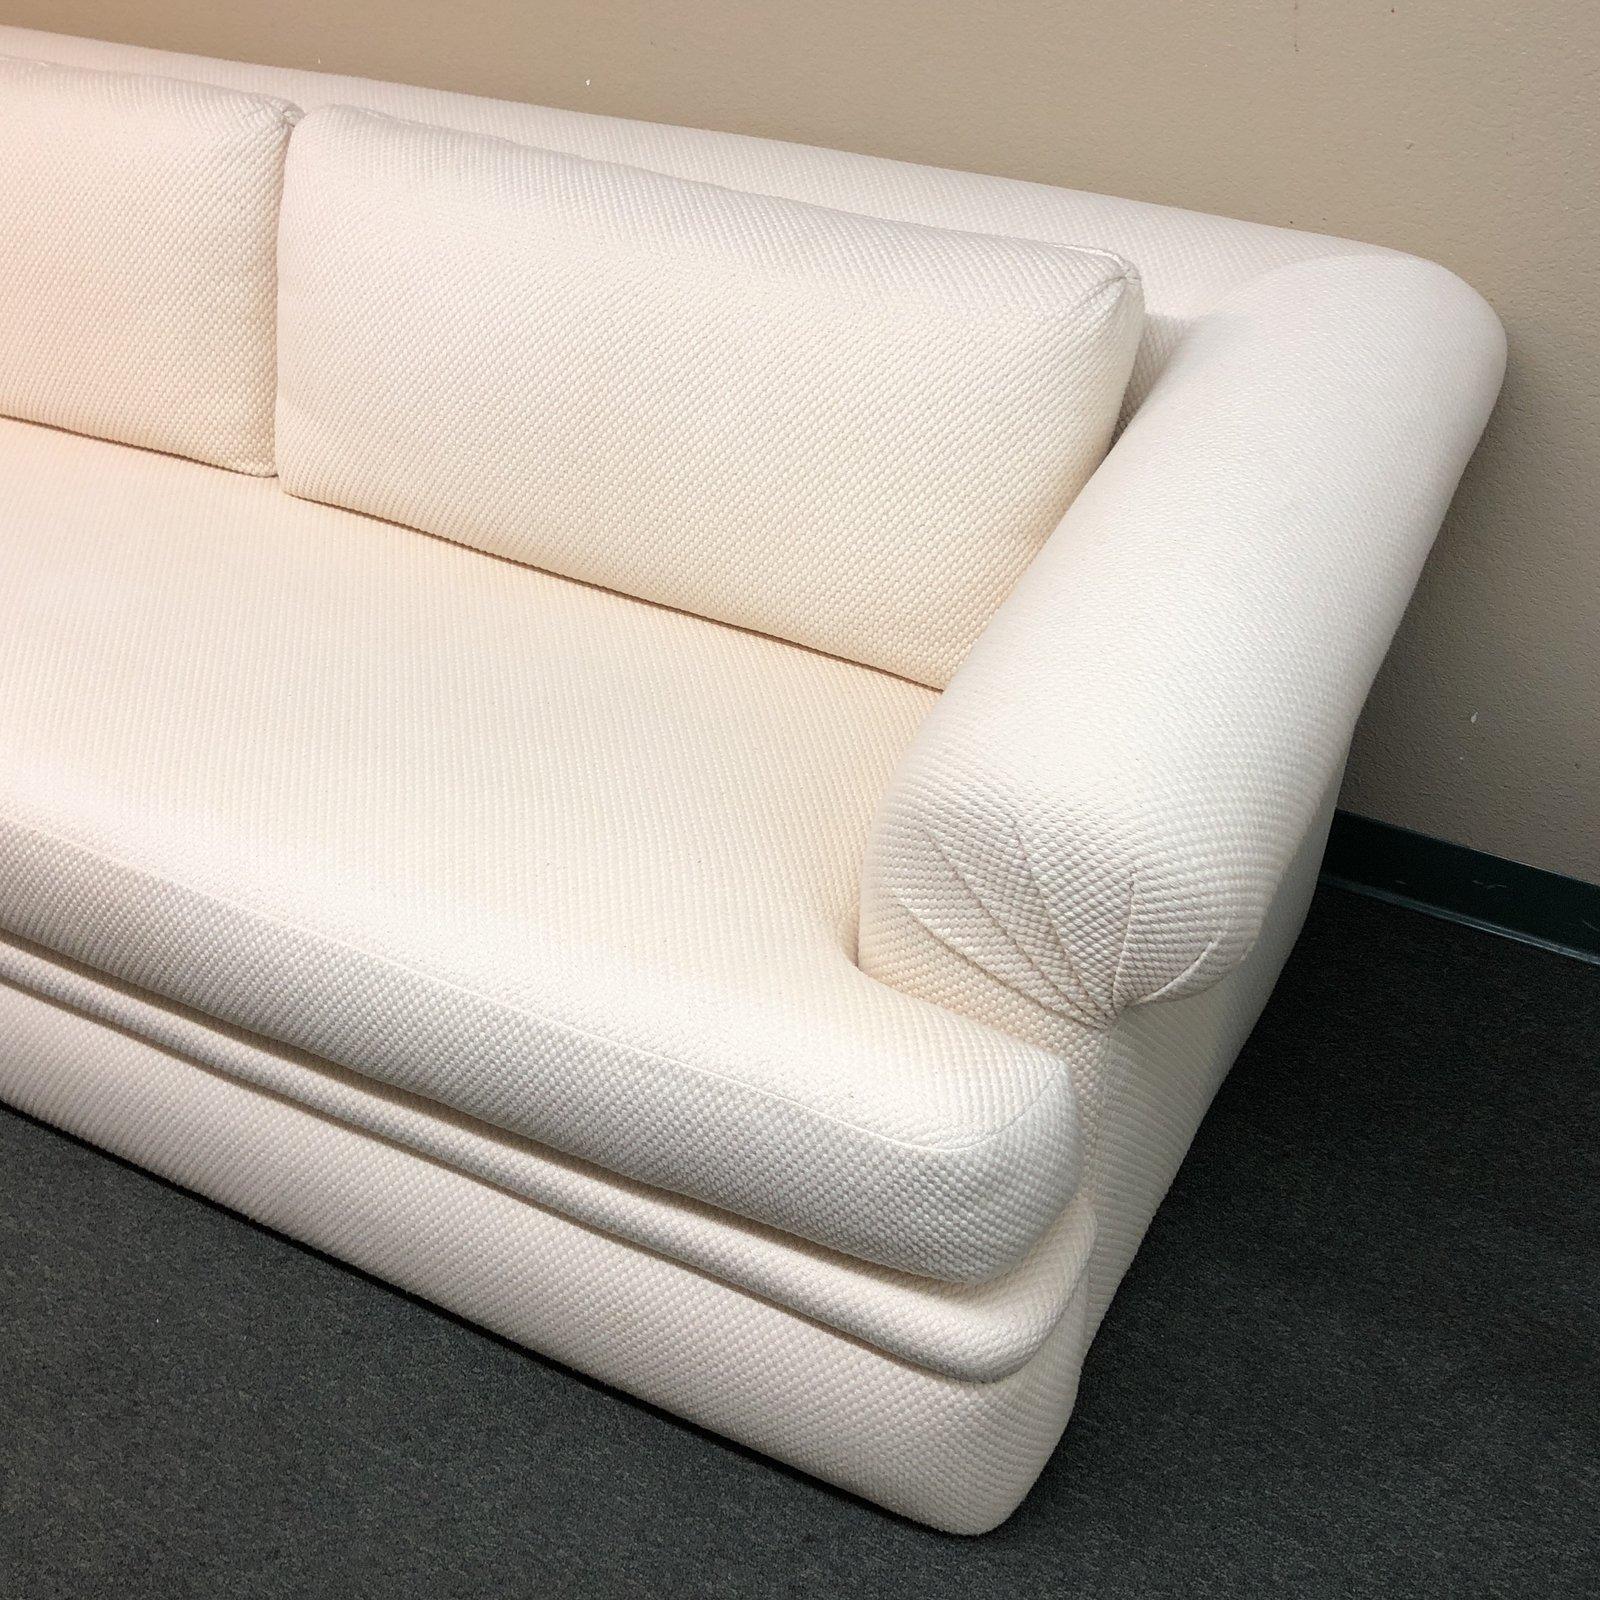 A.Rudin Off-White Upholstered Sofa In Good Condition For Sale In San Francisco, CA